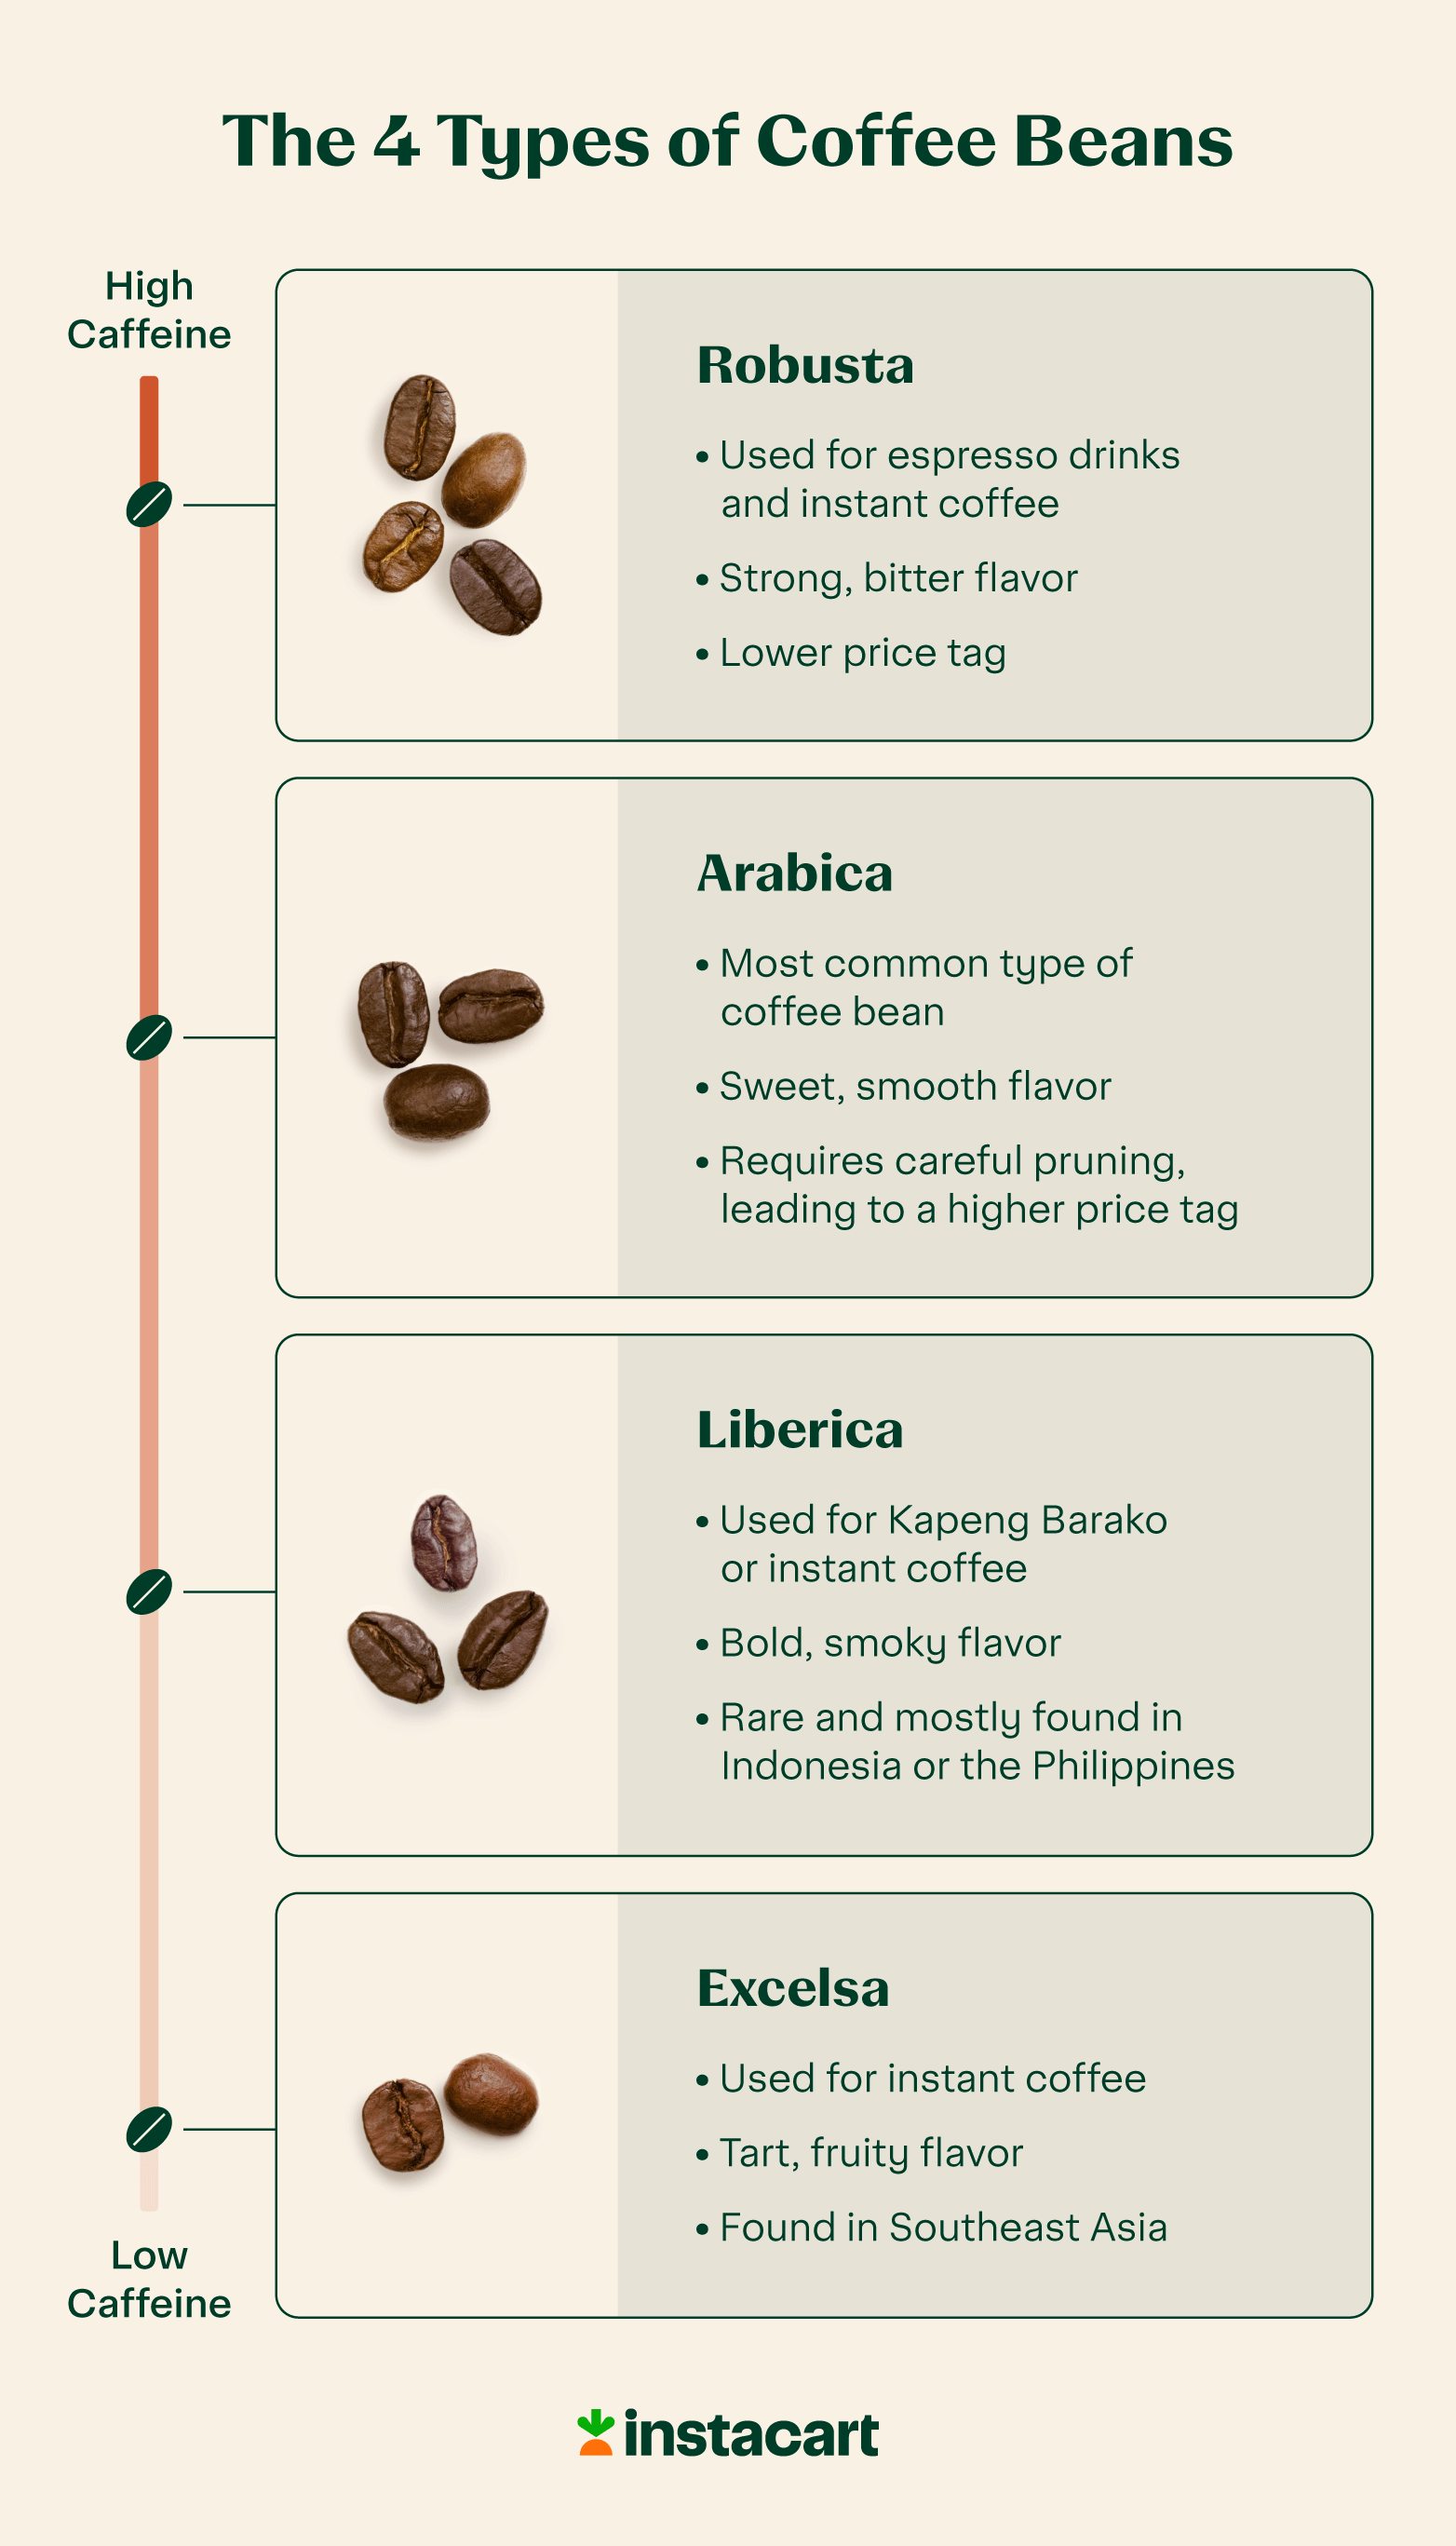 What roast of coffee is most popular?